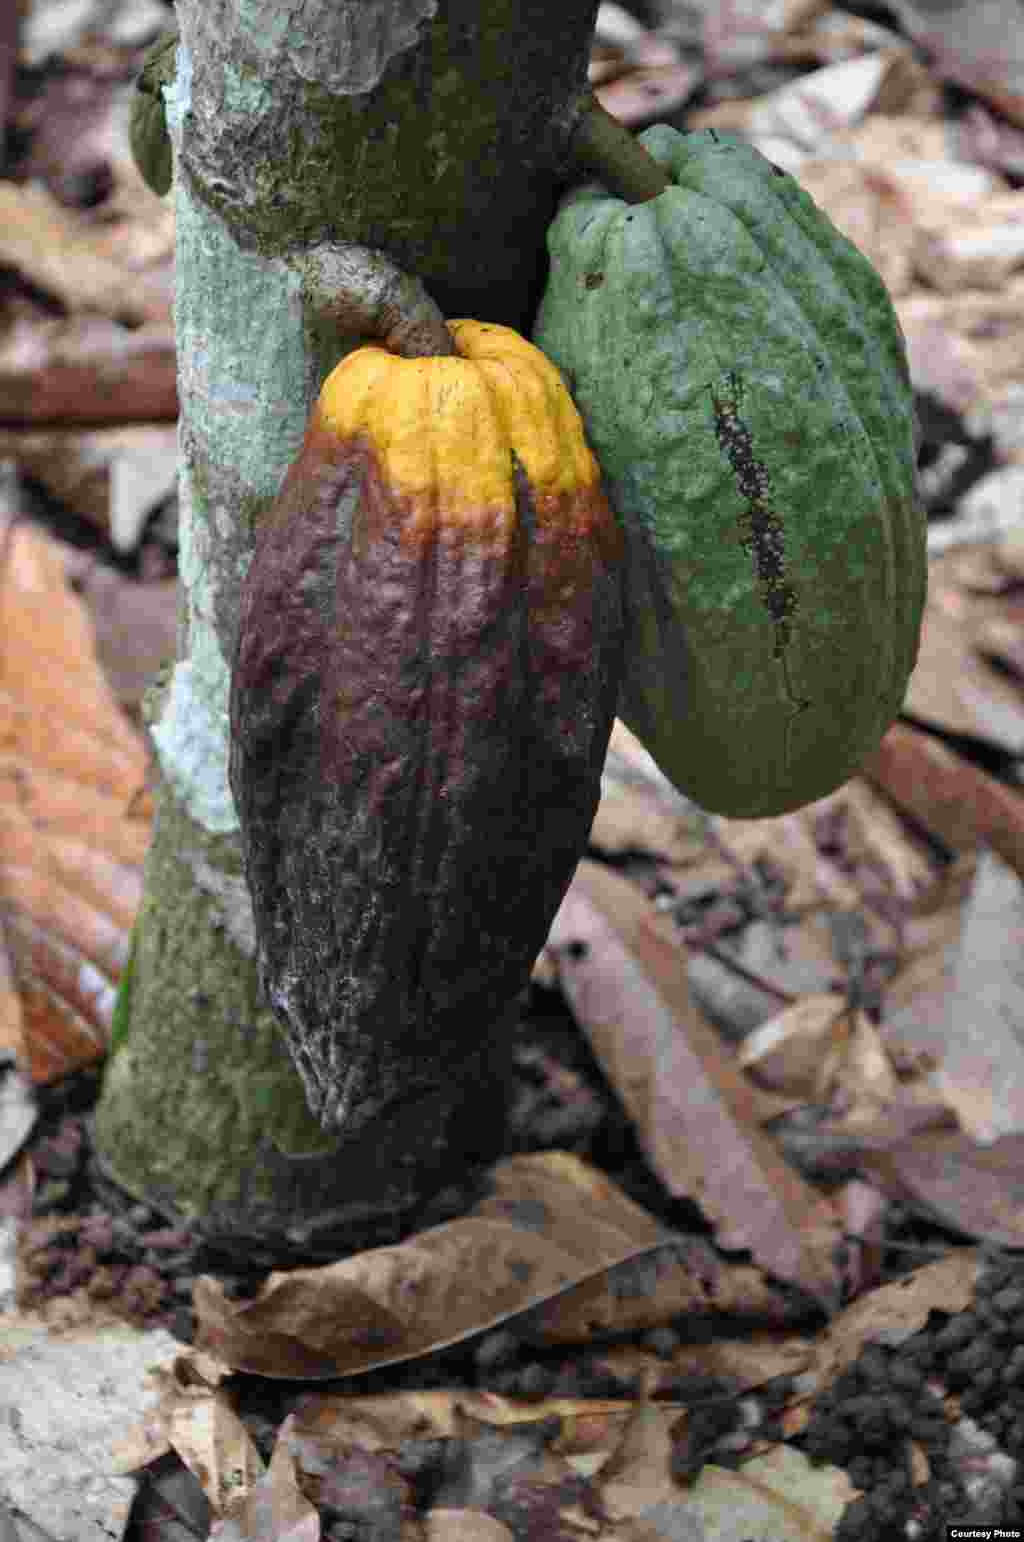 Pod of cocoa plant with black pod infection (left) next to a normal pod (right) (World Cocoa Foundation)